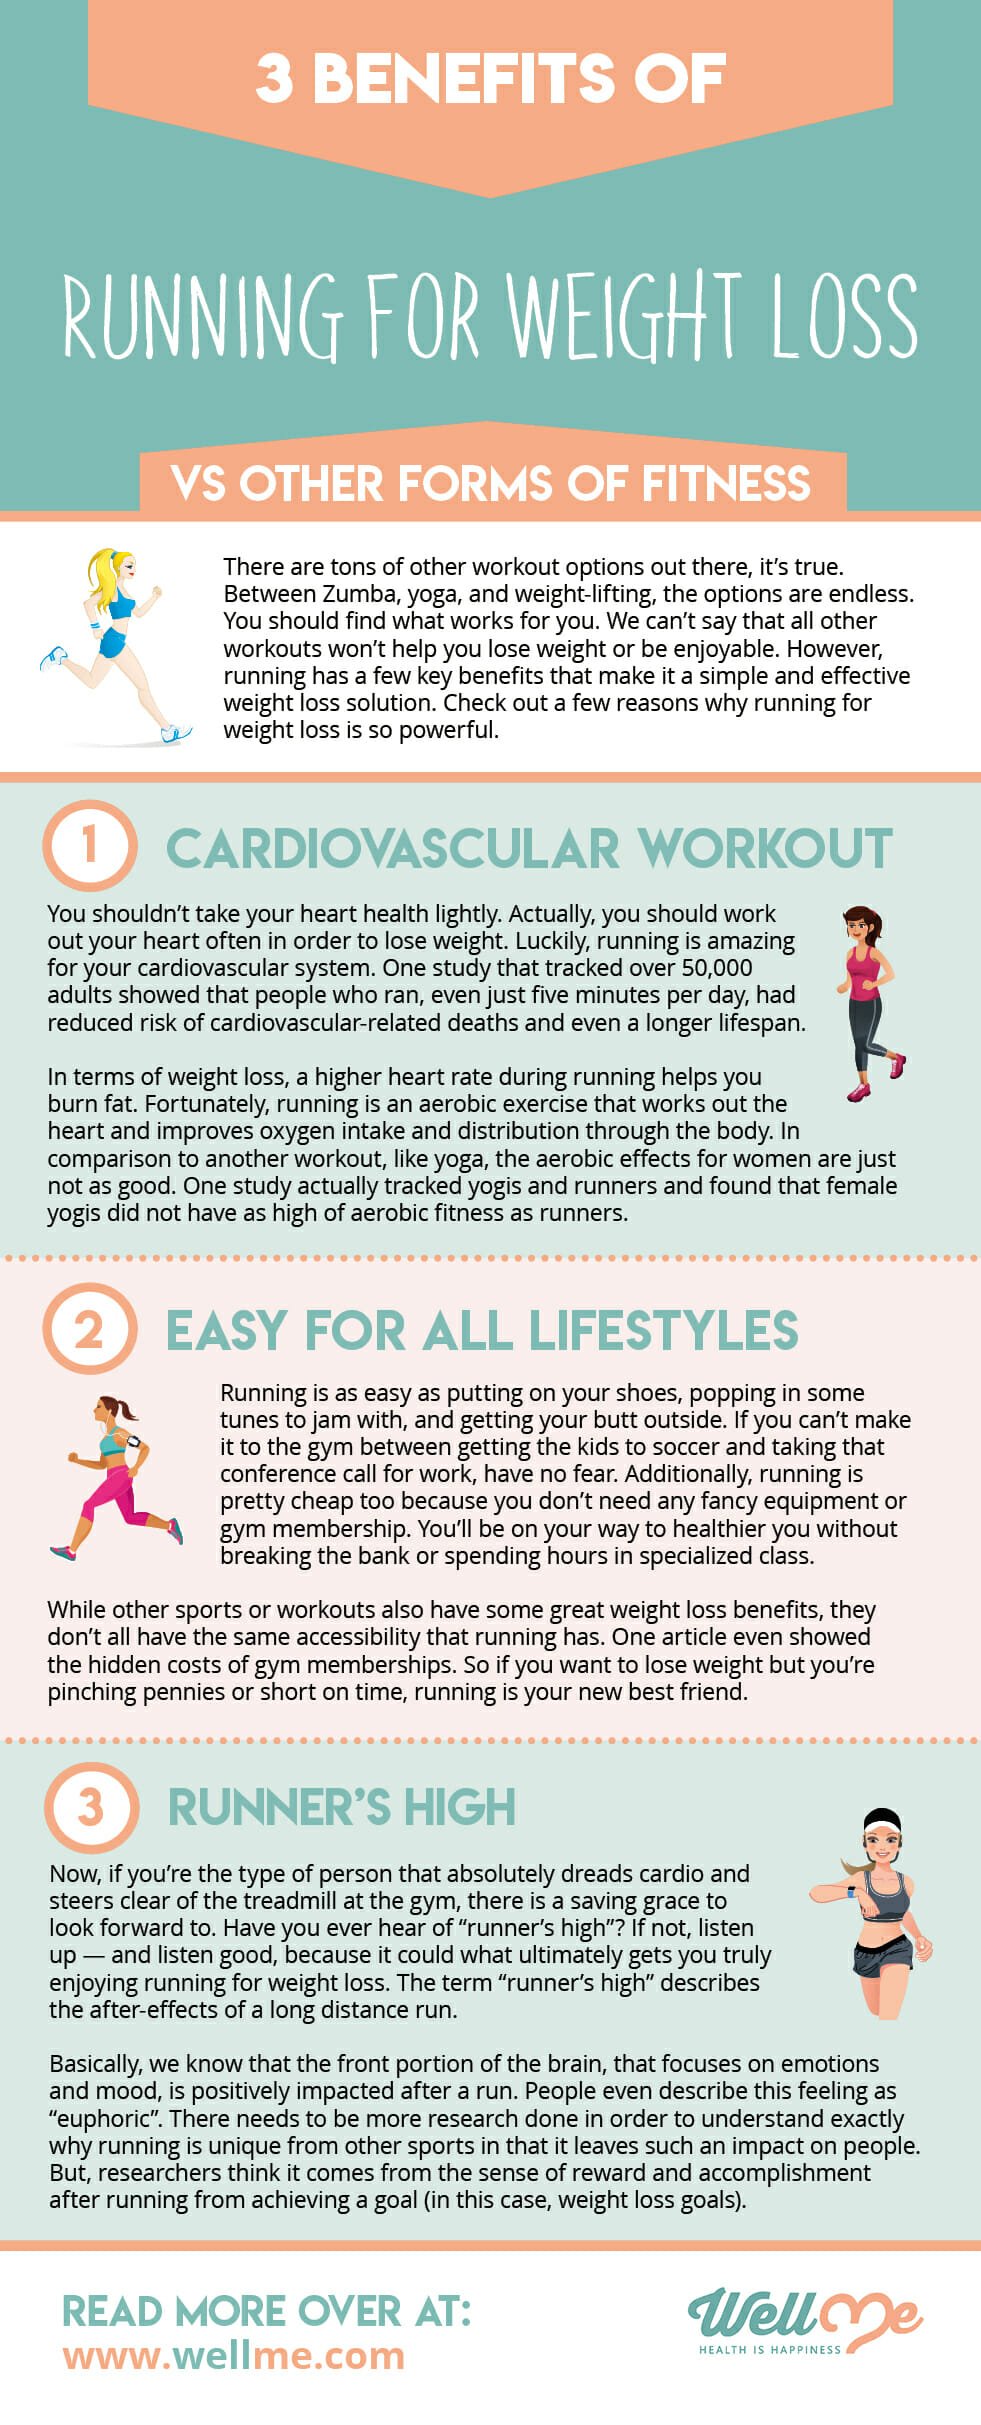 Running For Weight Loss Vs Other Forms of Fitness infographic